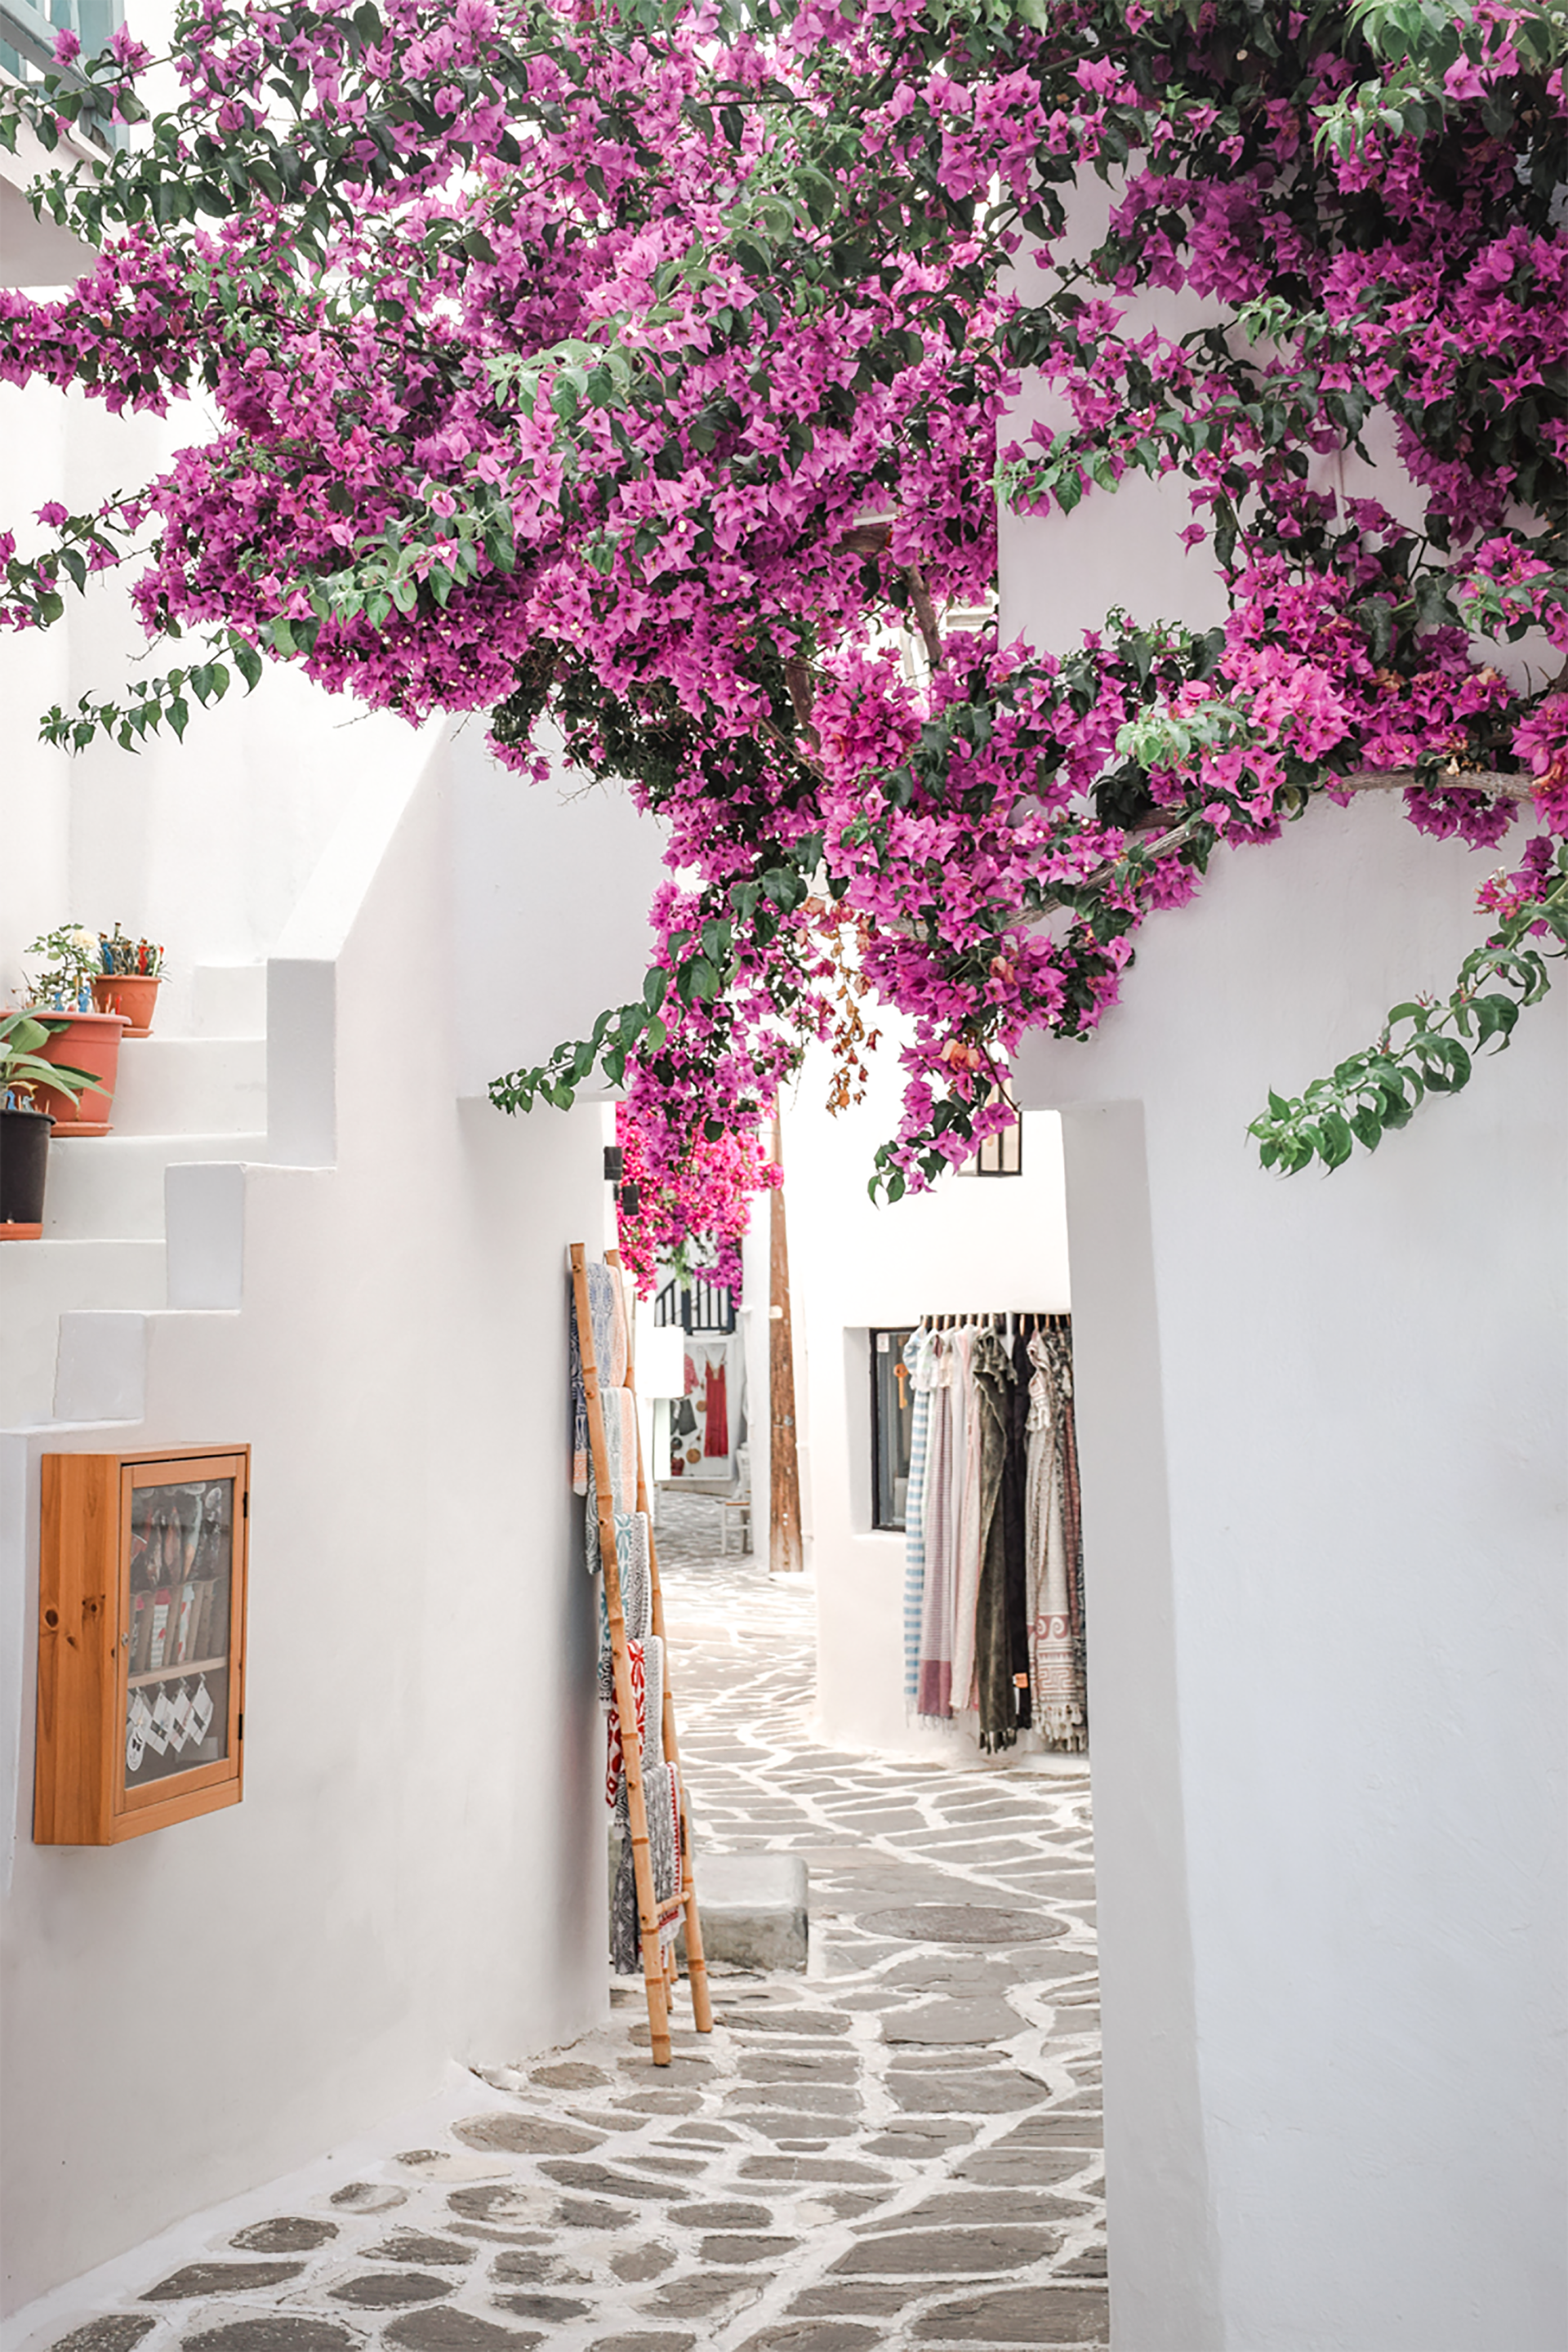 View of a Typical Narrow Street in Old Town of Naoussa, Paros island, Cyclades - Greece Holidays Barter's Travelnet